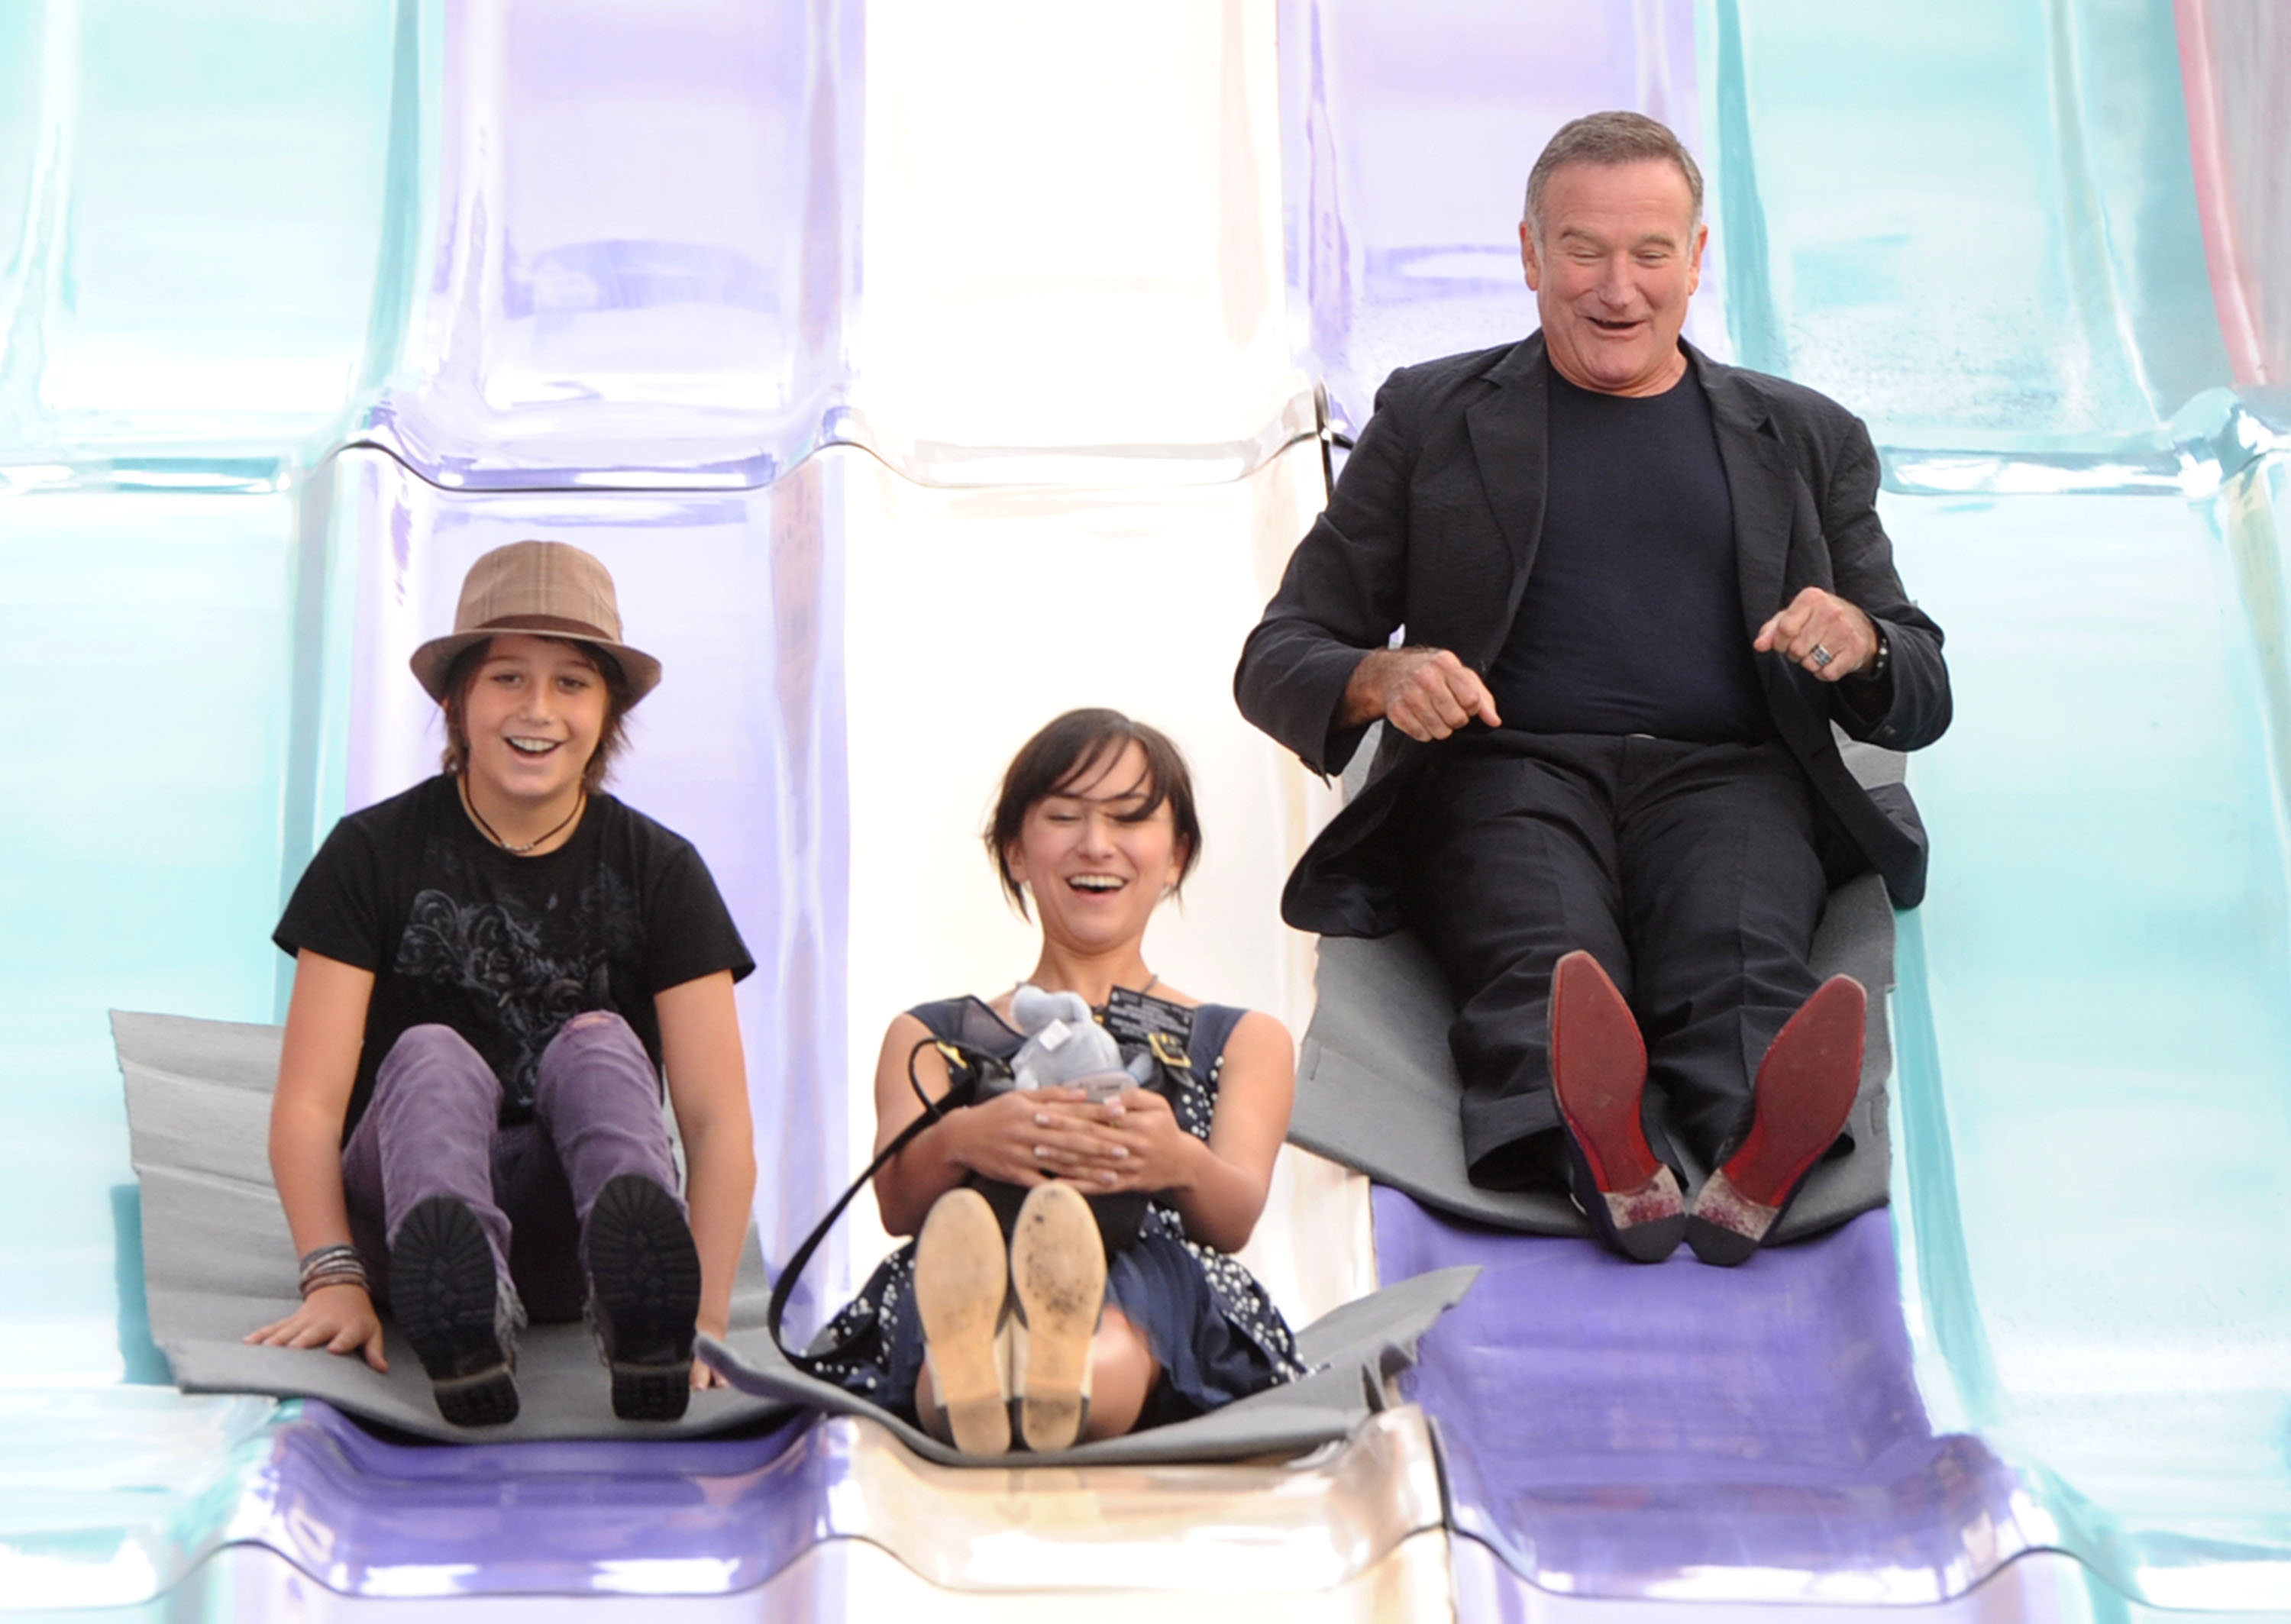 Robin Williams with Milo Jacob Manheim and his daughter Zelda in California in 2011 | Source: Getty Images